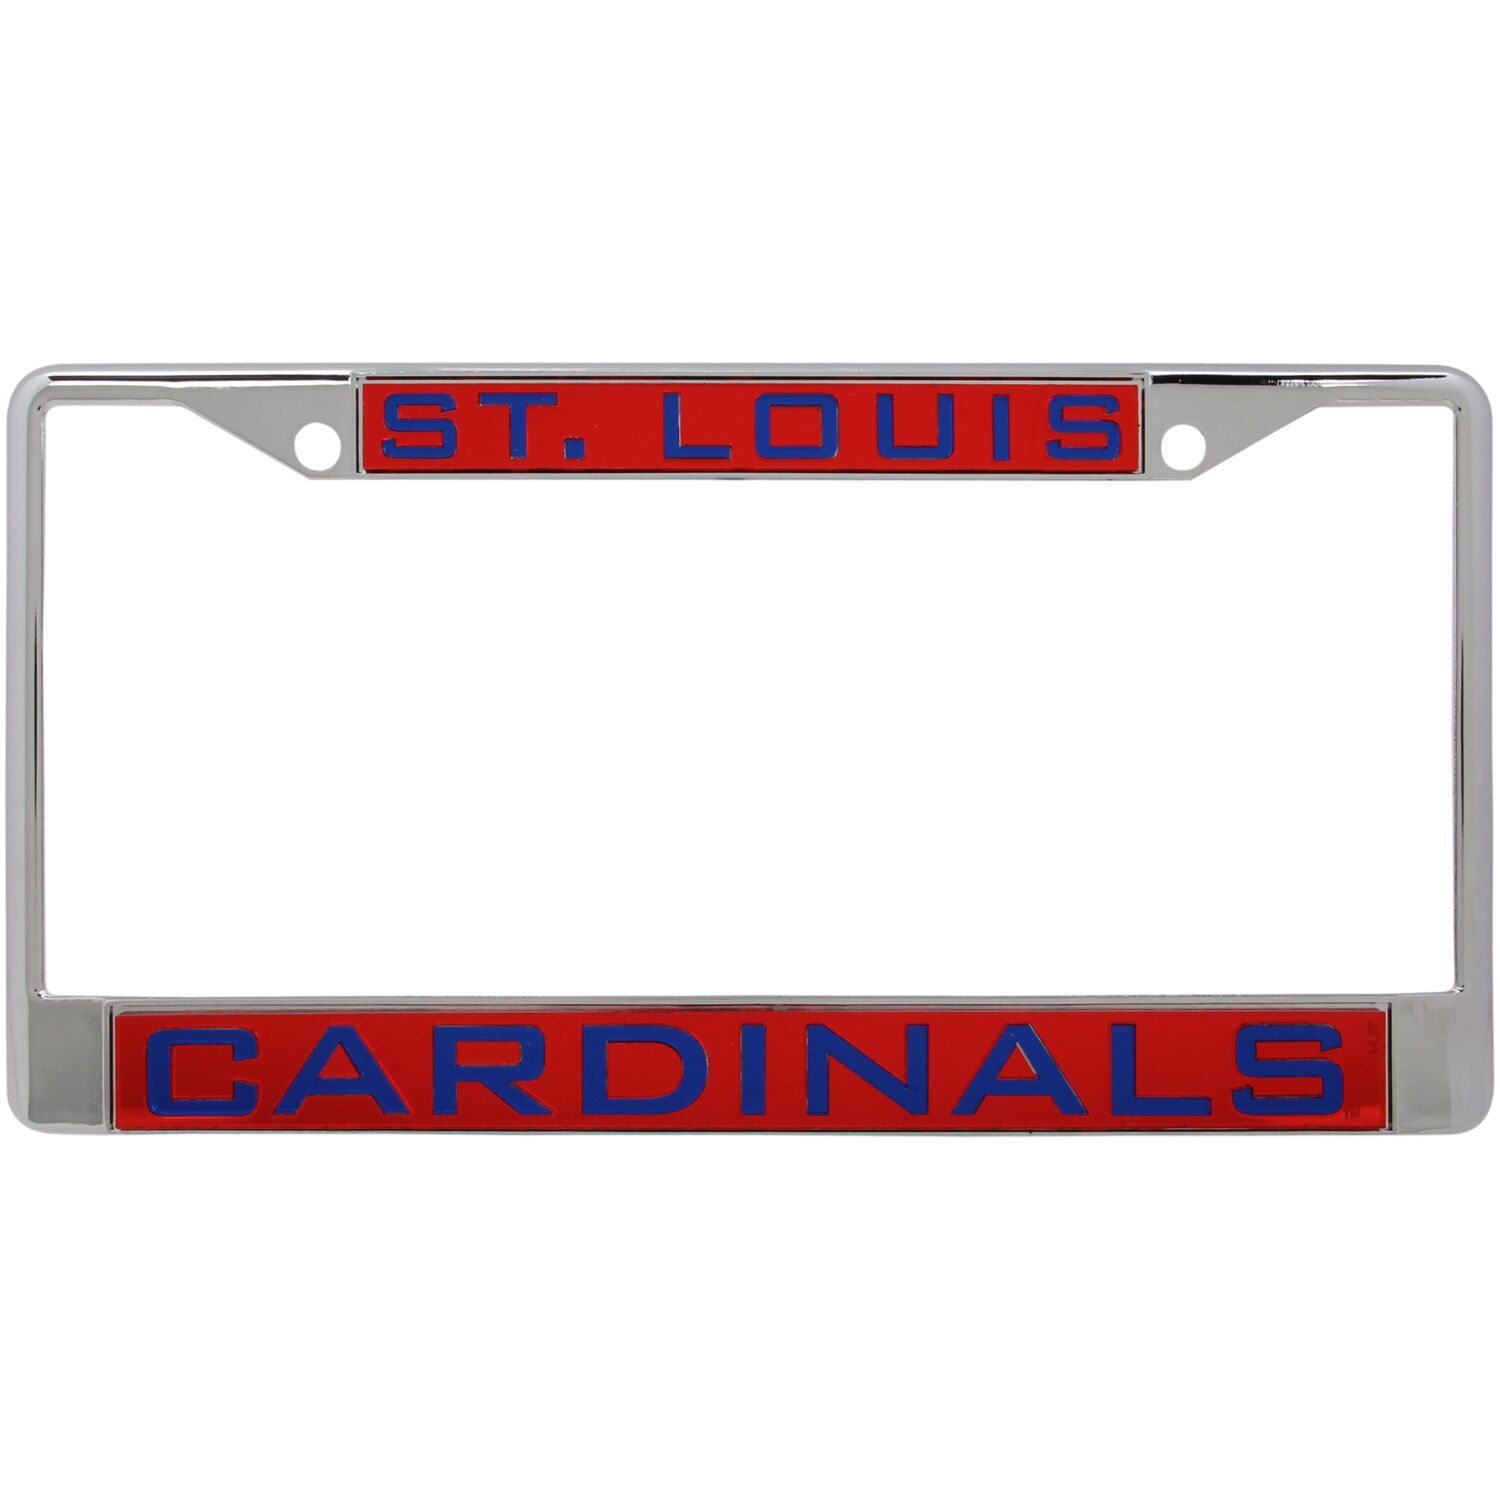 Image for Unbranded WinCraft St. Louis Cardinals Laser Inlaid Metal License Plate Frame at Kohl's.